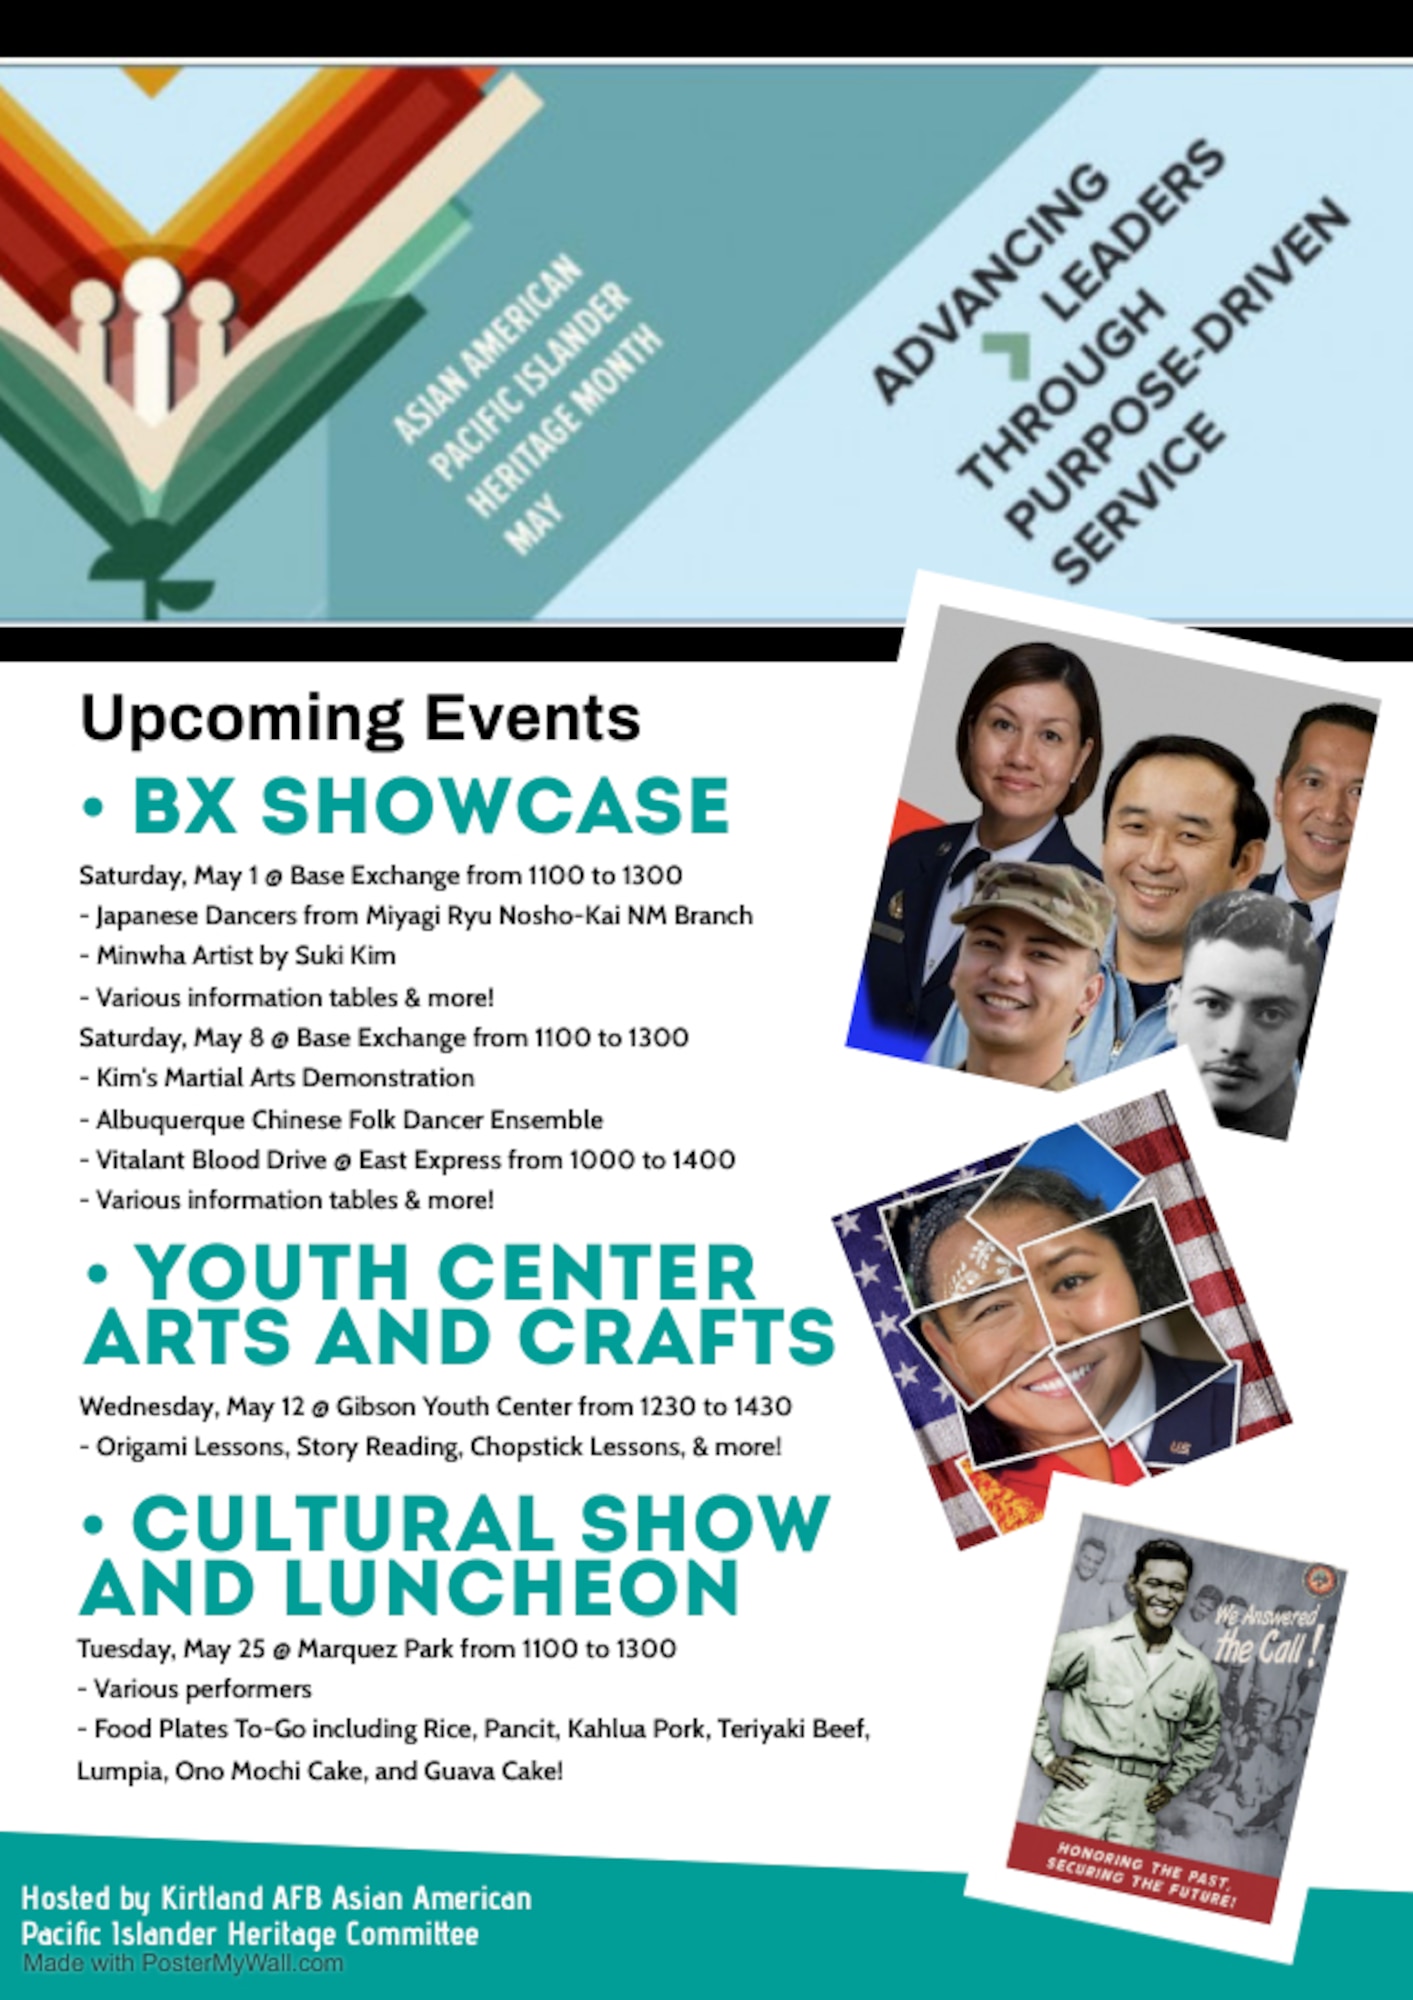 List of upcoming events, on the left, to celebrate Asian American Pacific Islander heritage month. On the right, images of various Asian American Pacific Islanders serving in the military throughout history.